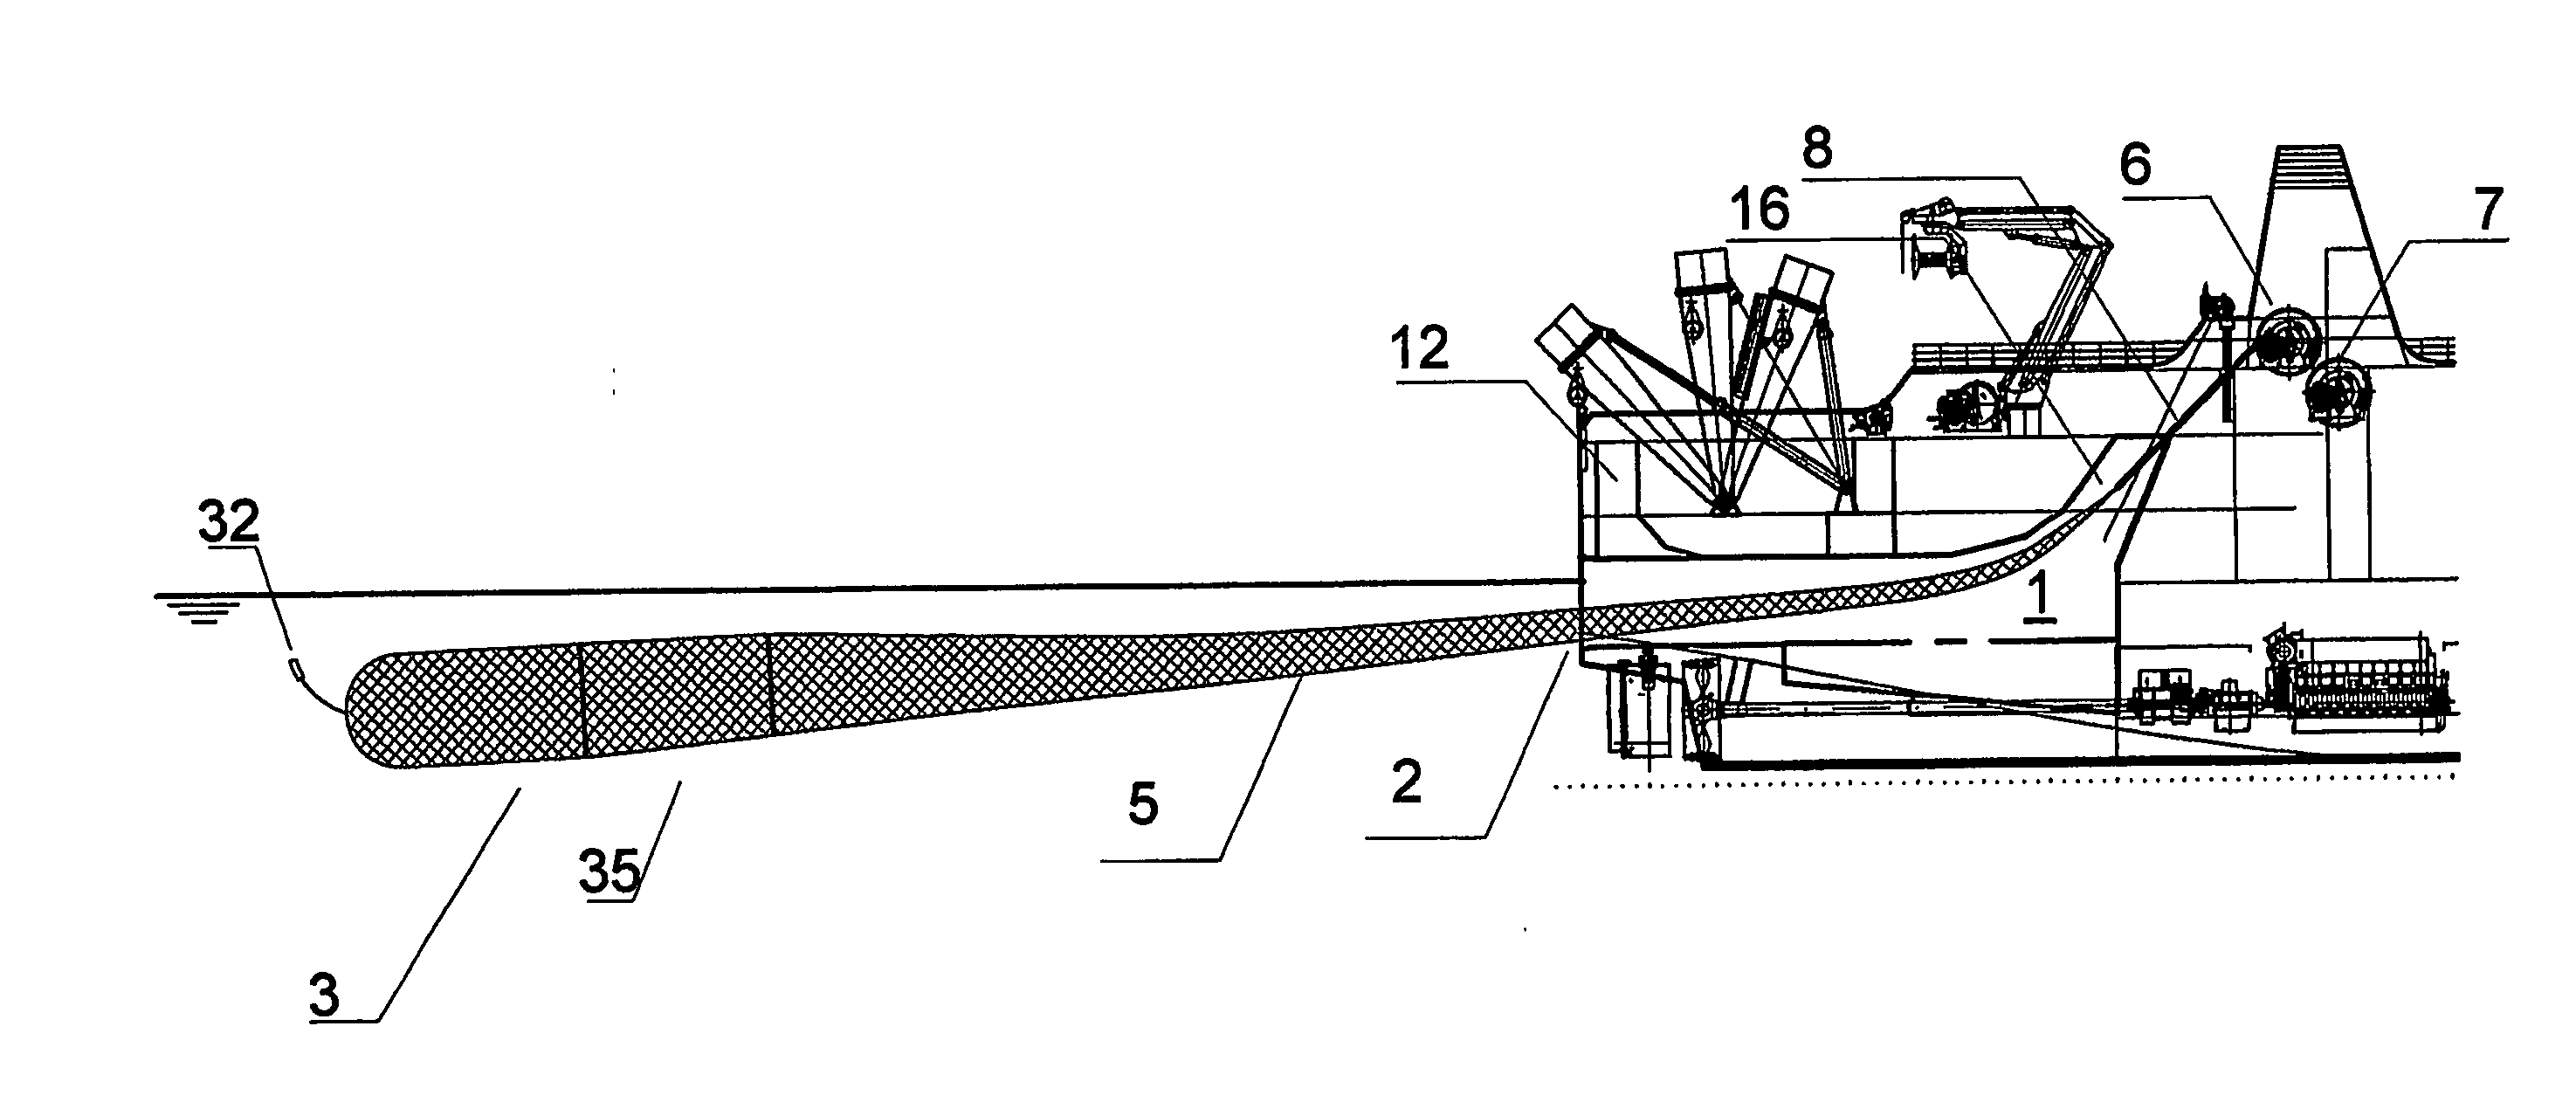 Trawling vessel with a lock chamber